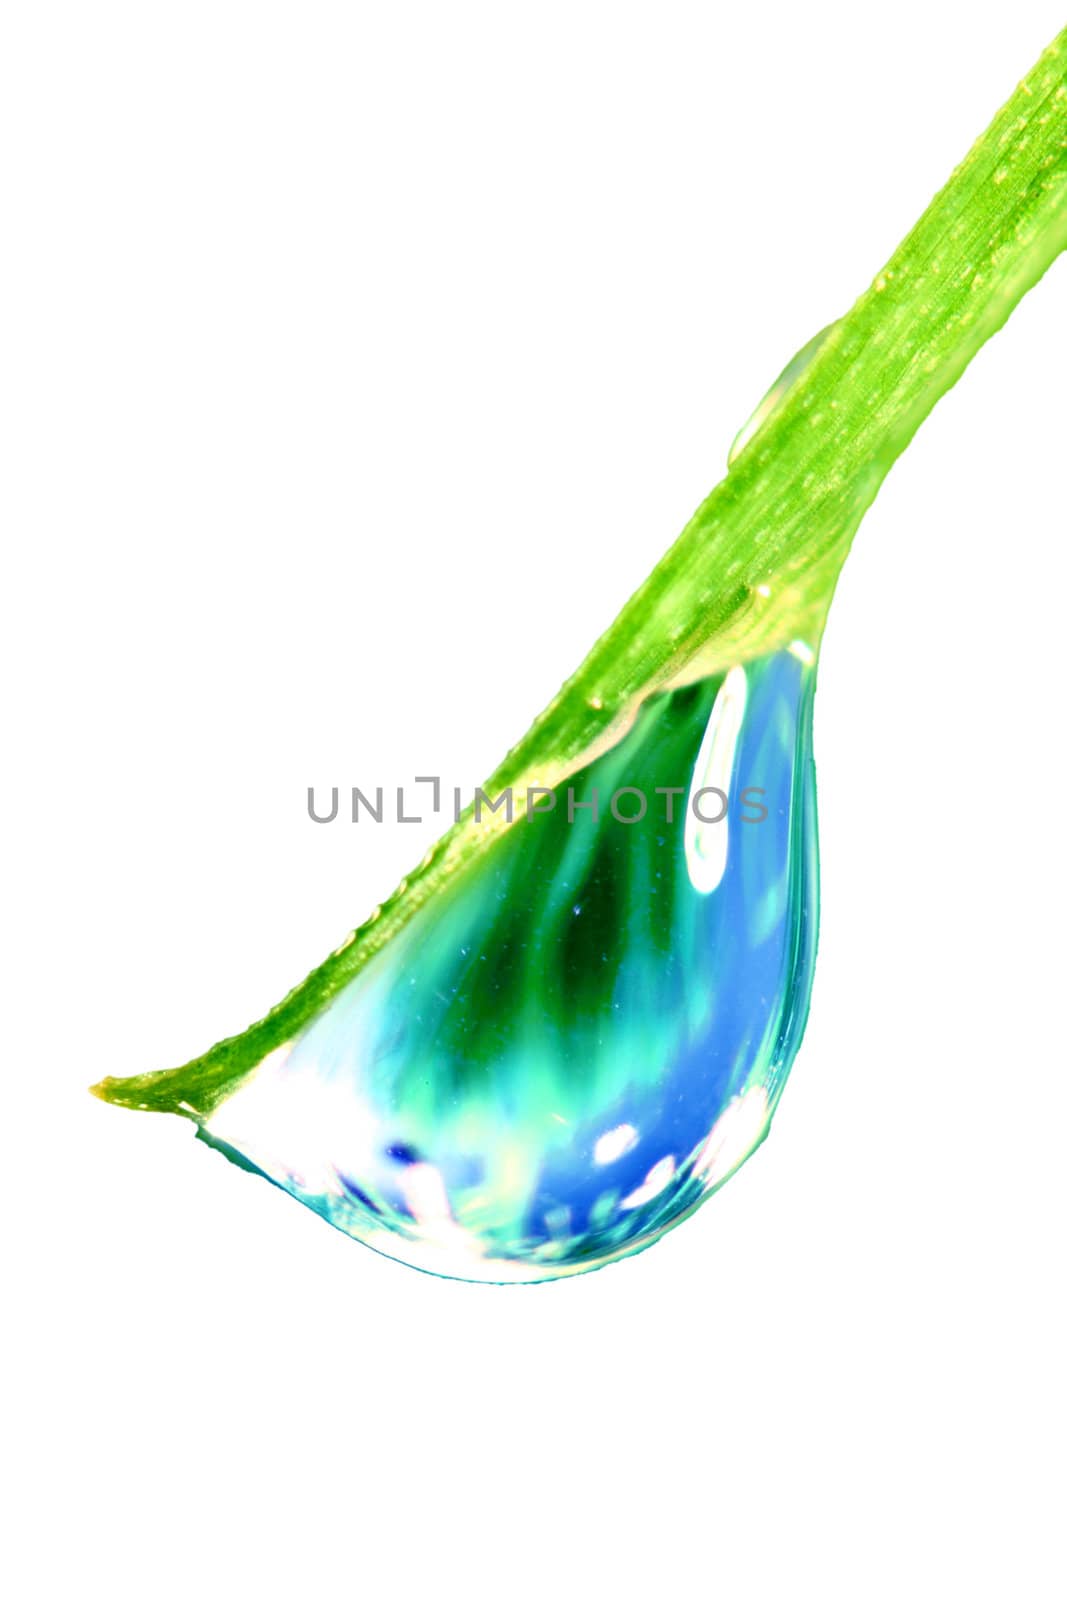 big water drop on grass blade isolated